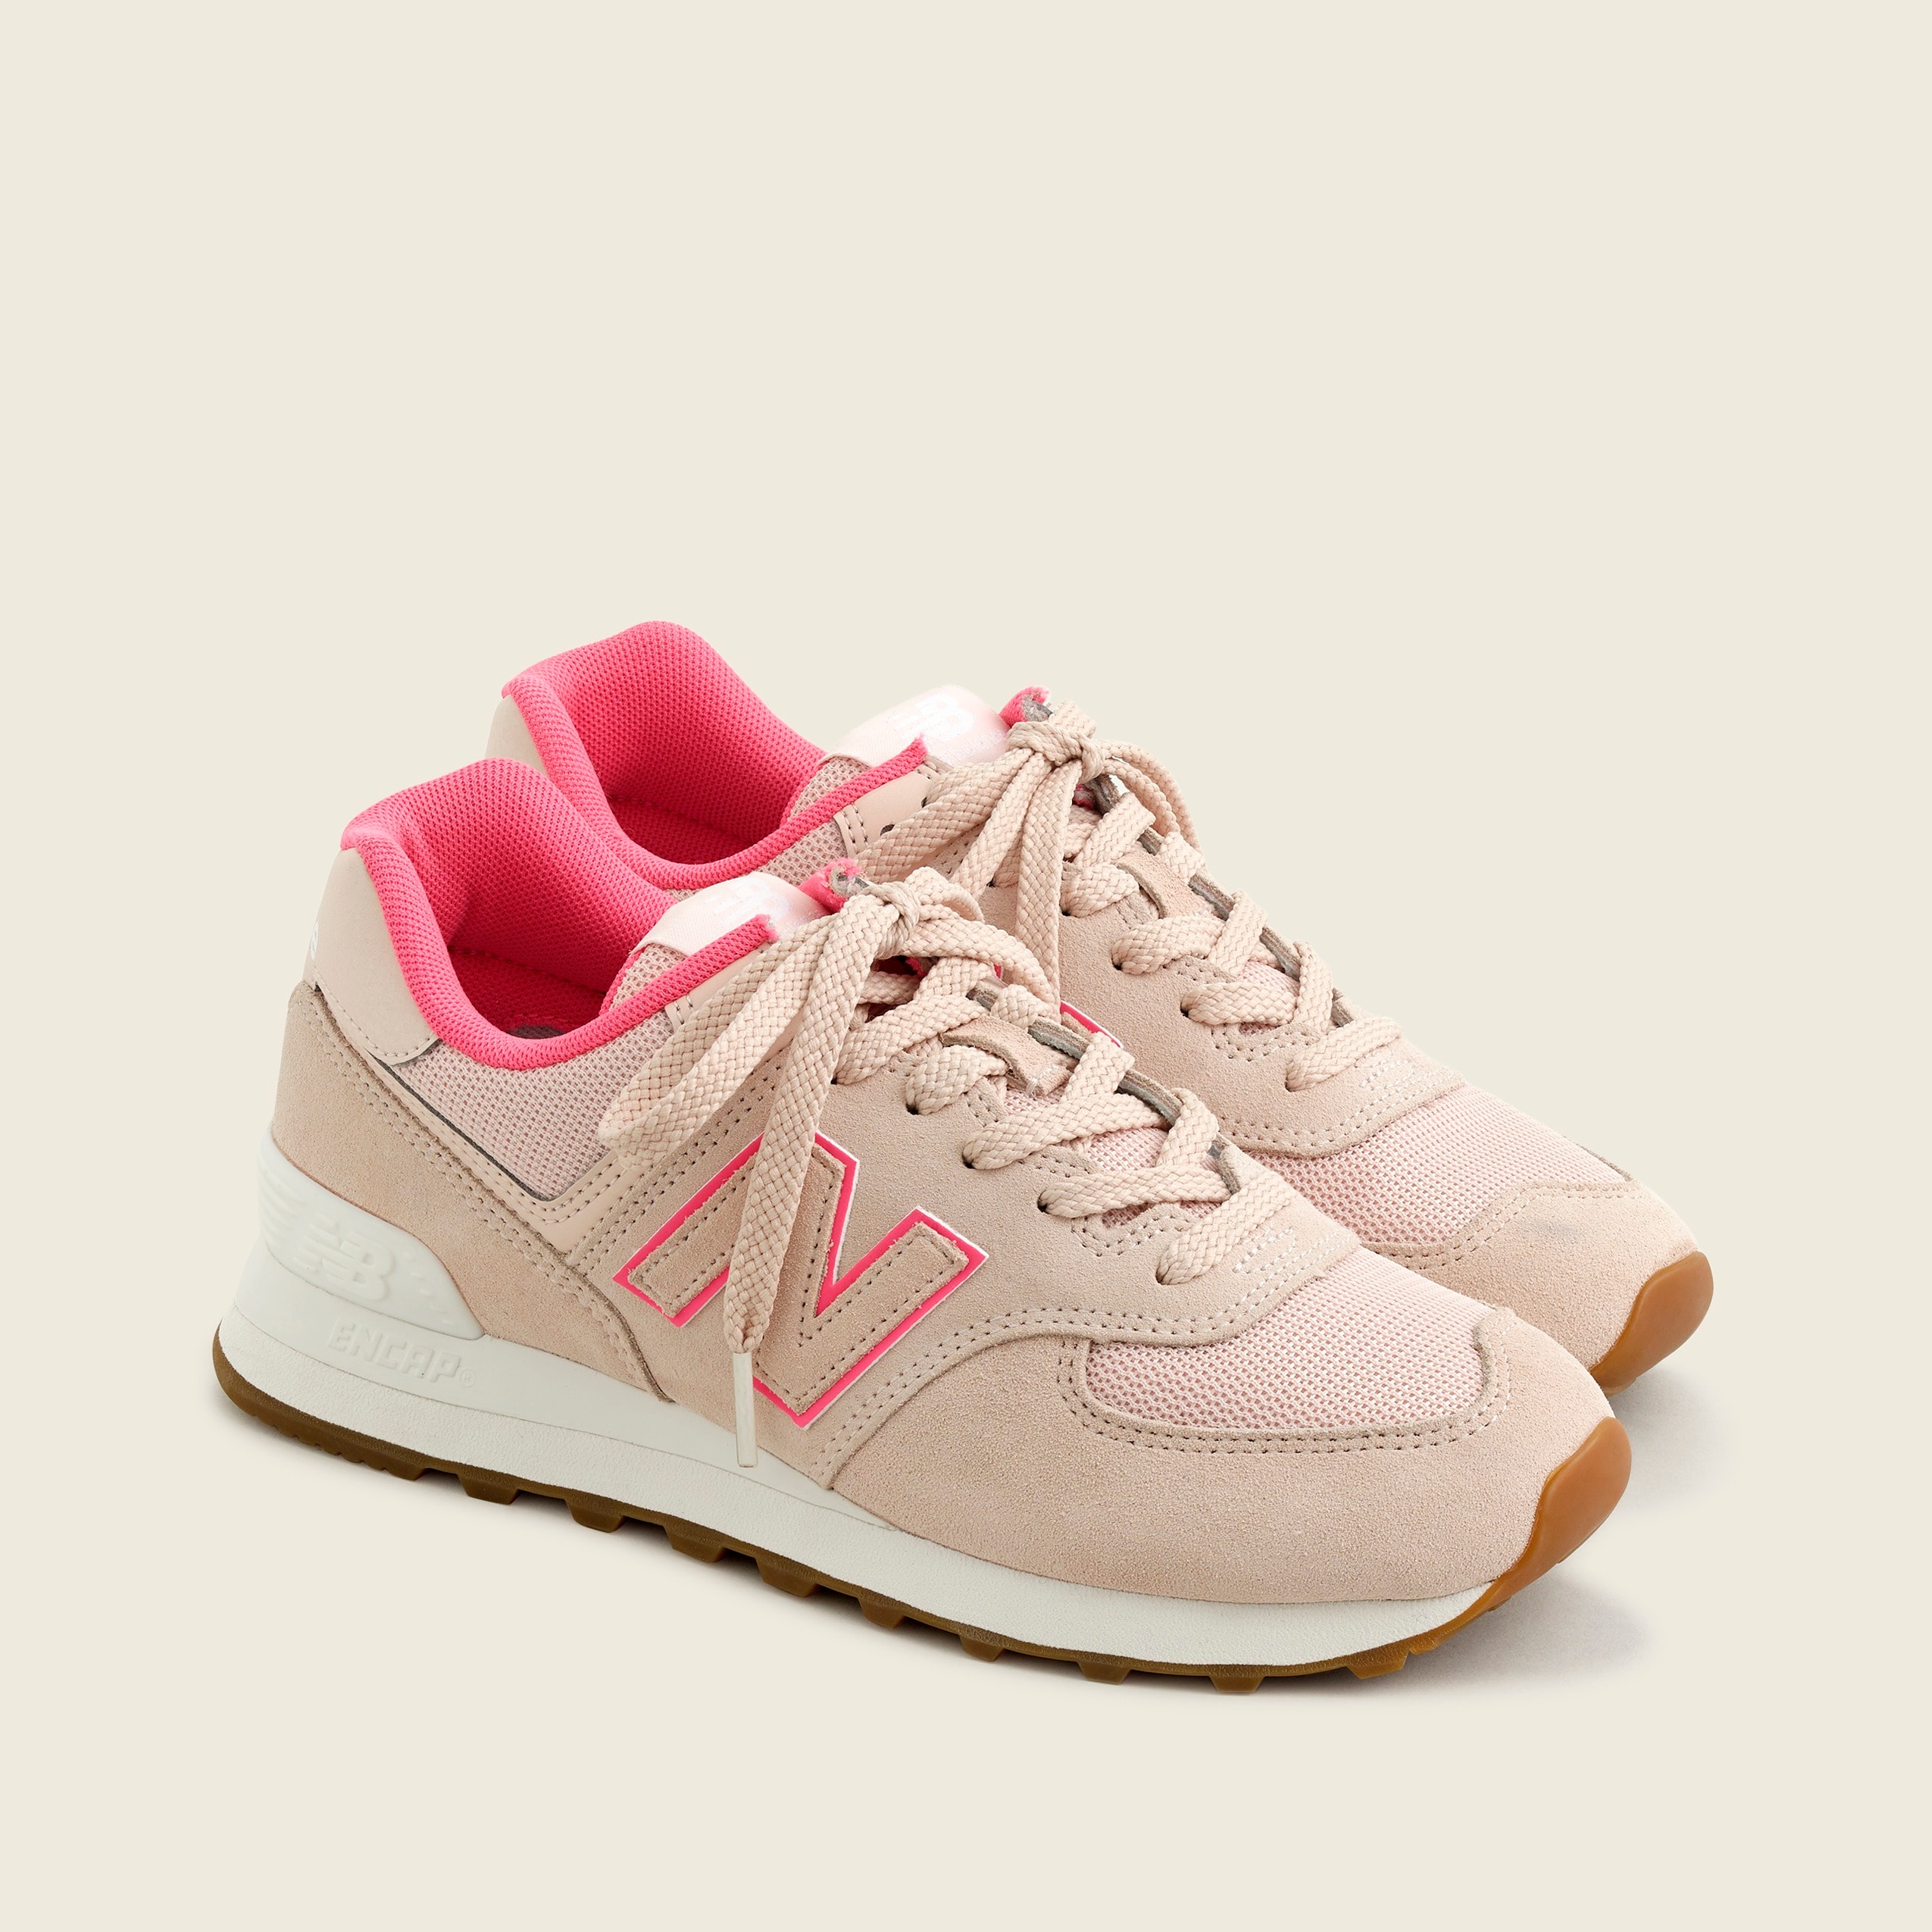 pink new balance shoes